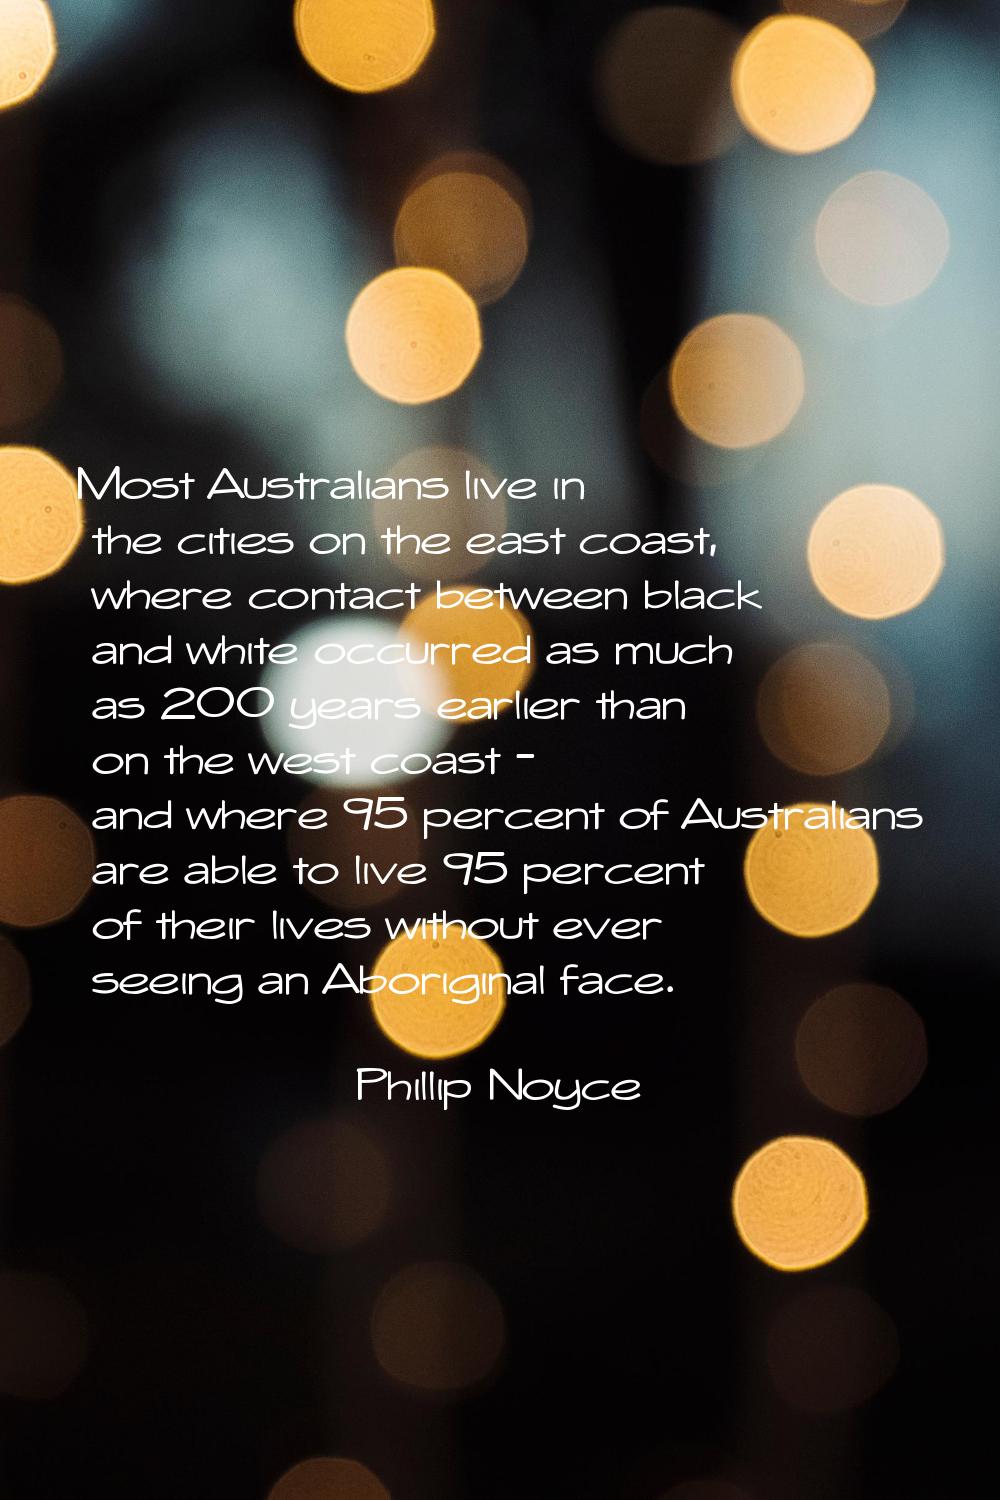 Most Australians live in the cities on the east coast, where contact between black and white occurr